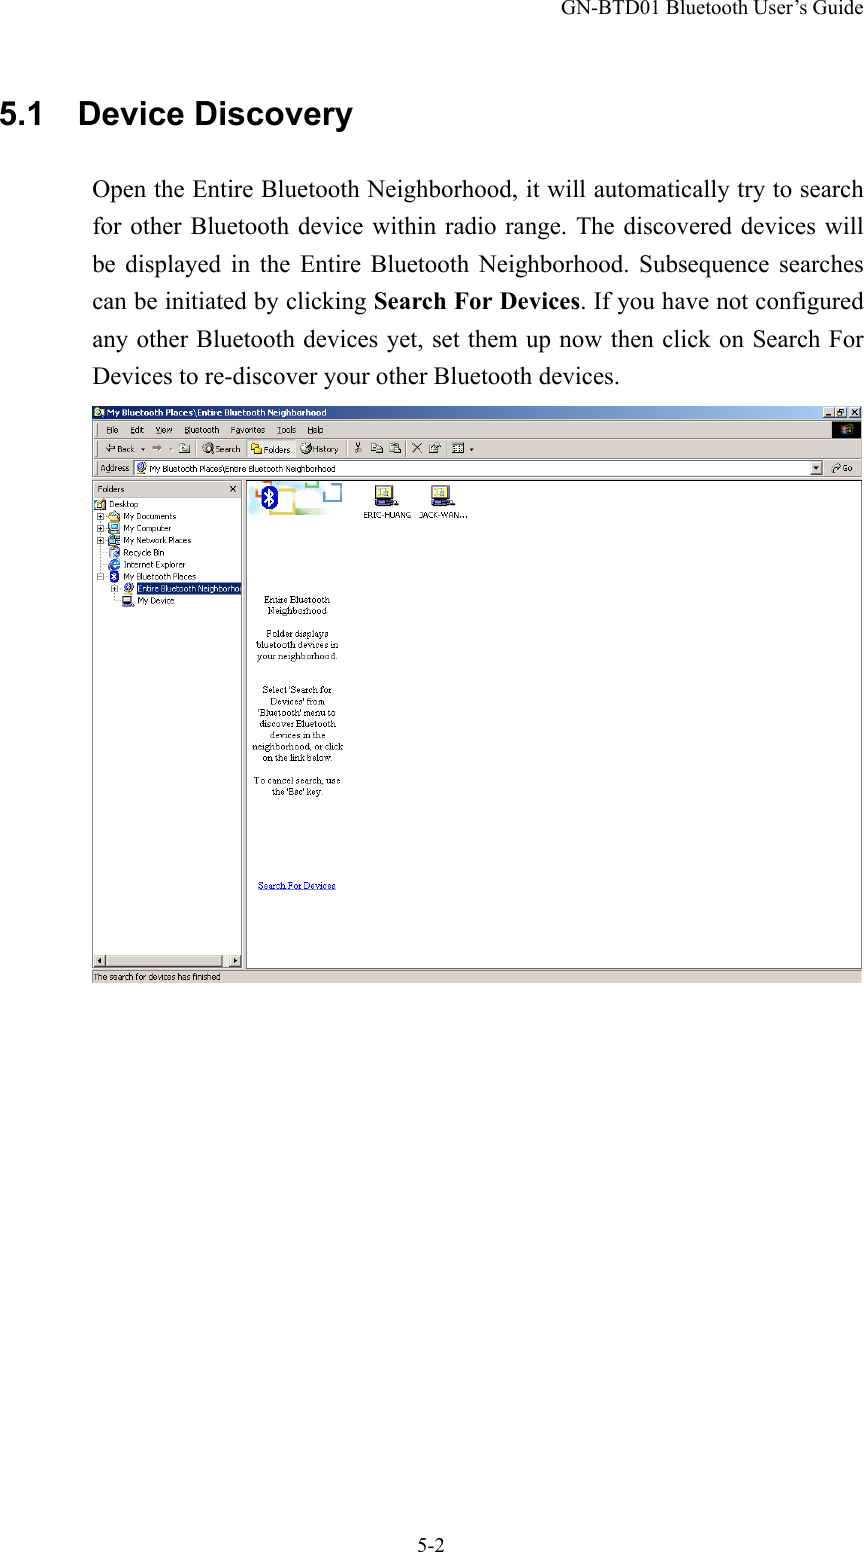 GN-BTD01 Bluetooth User’s Guide 5-2 5.1  Device Discovery Open the Entire Bluetooth Neighborhood, it will automatically try to search for other Bluetooth device within radio range. The discovered devices will be displayed in the Entire Bluetooth Neighborhood. Subsequence searches can be initiated by clicking Search For Devices. If you have not configured any other Bluetooth devices yet, set them up now then click on Search For Devices to re-discover your other Bluetooth devices.  